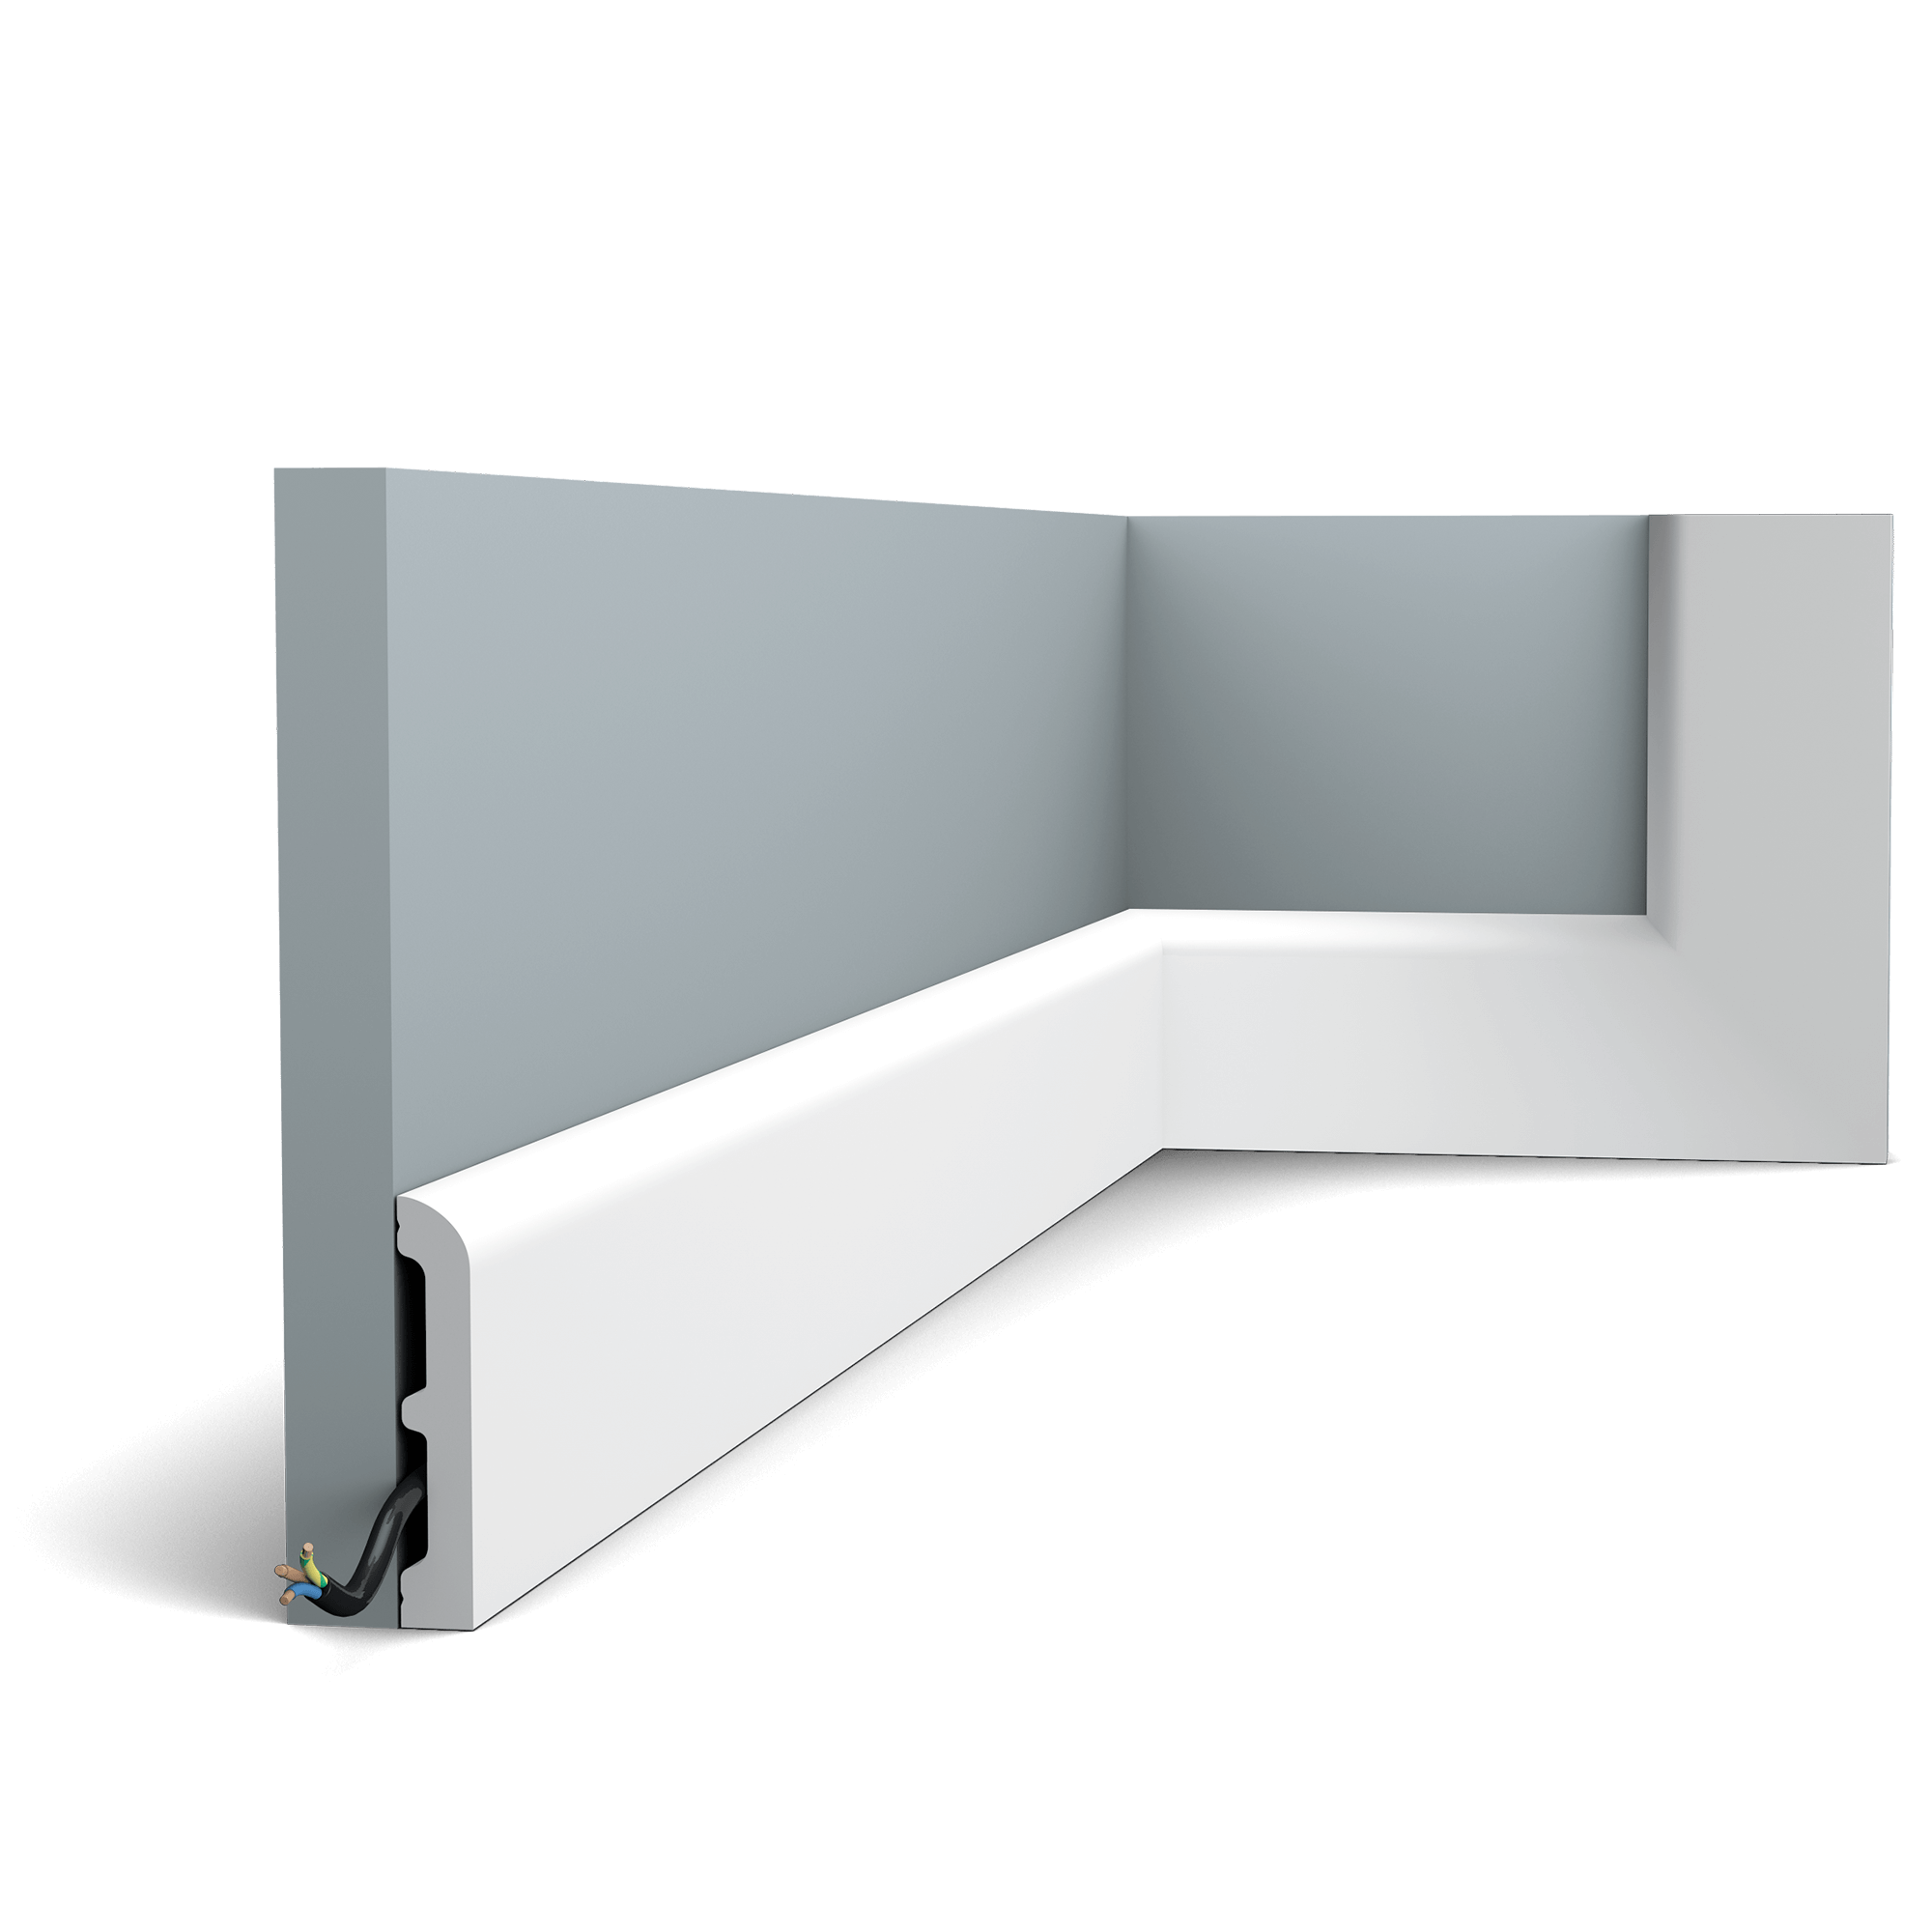 This multifunctional skirting board with rounded top provides endless possibilities. Use together with other members of the CASCADE family to effortlessly provide the entire space with a cohesive look.